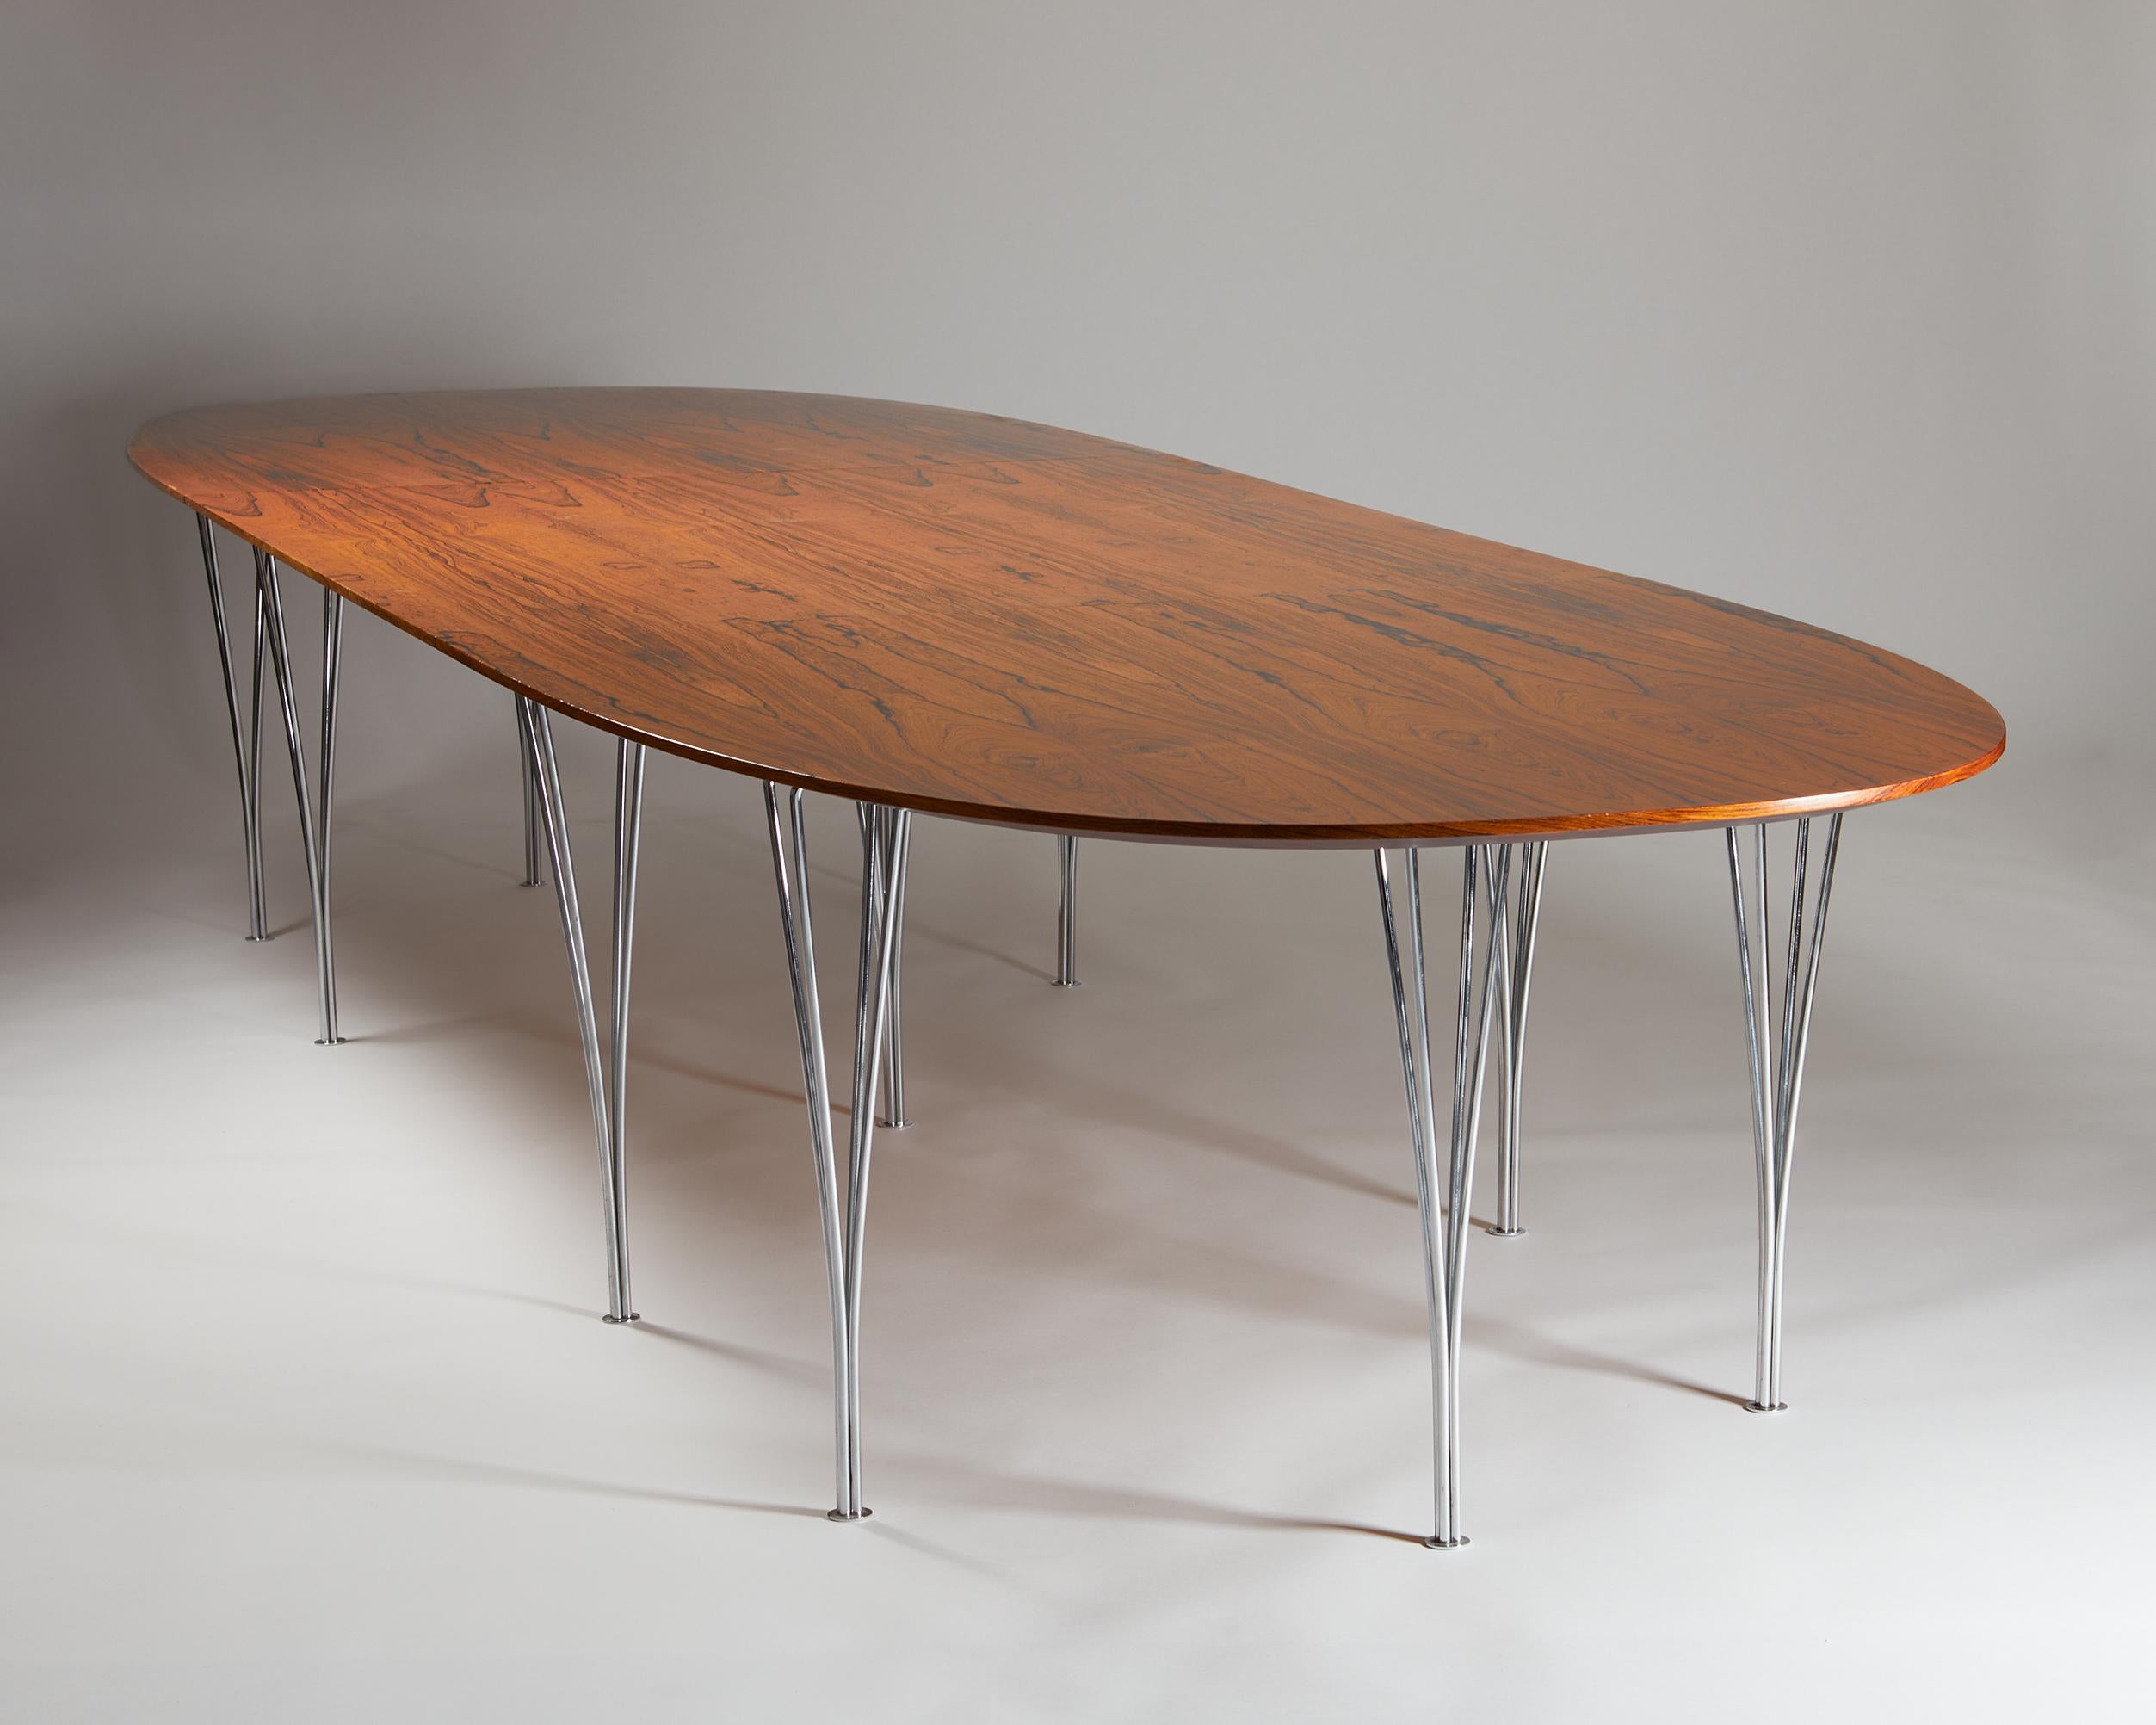 Dining table designed by Bruno Mathsson and Piet Hein,
Denmark. 1980s.
Special order.

Rosewood and steel.

Dimensions:
H: 71 cm / 2' 4